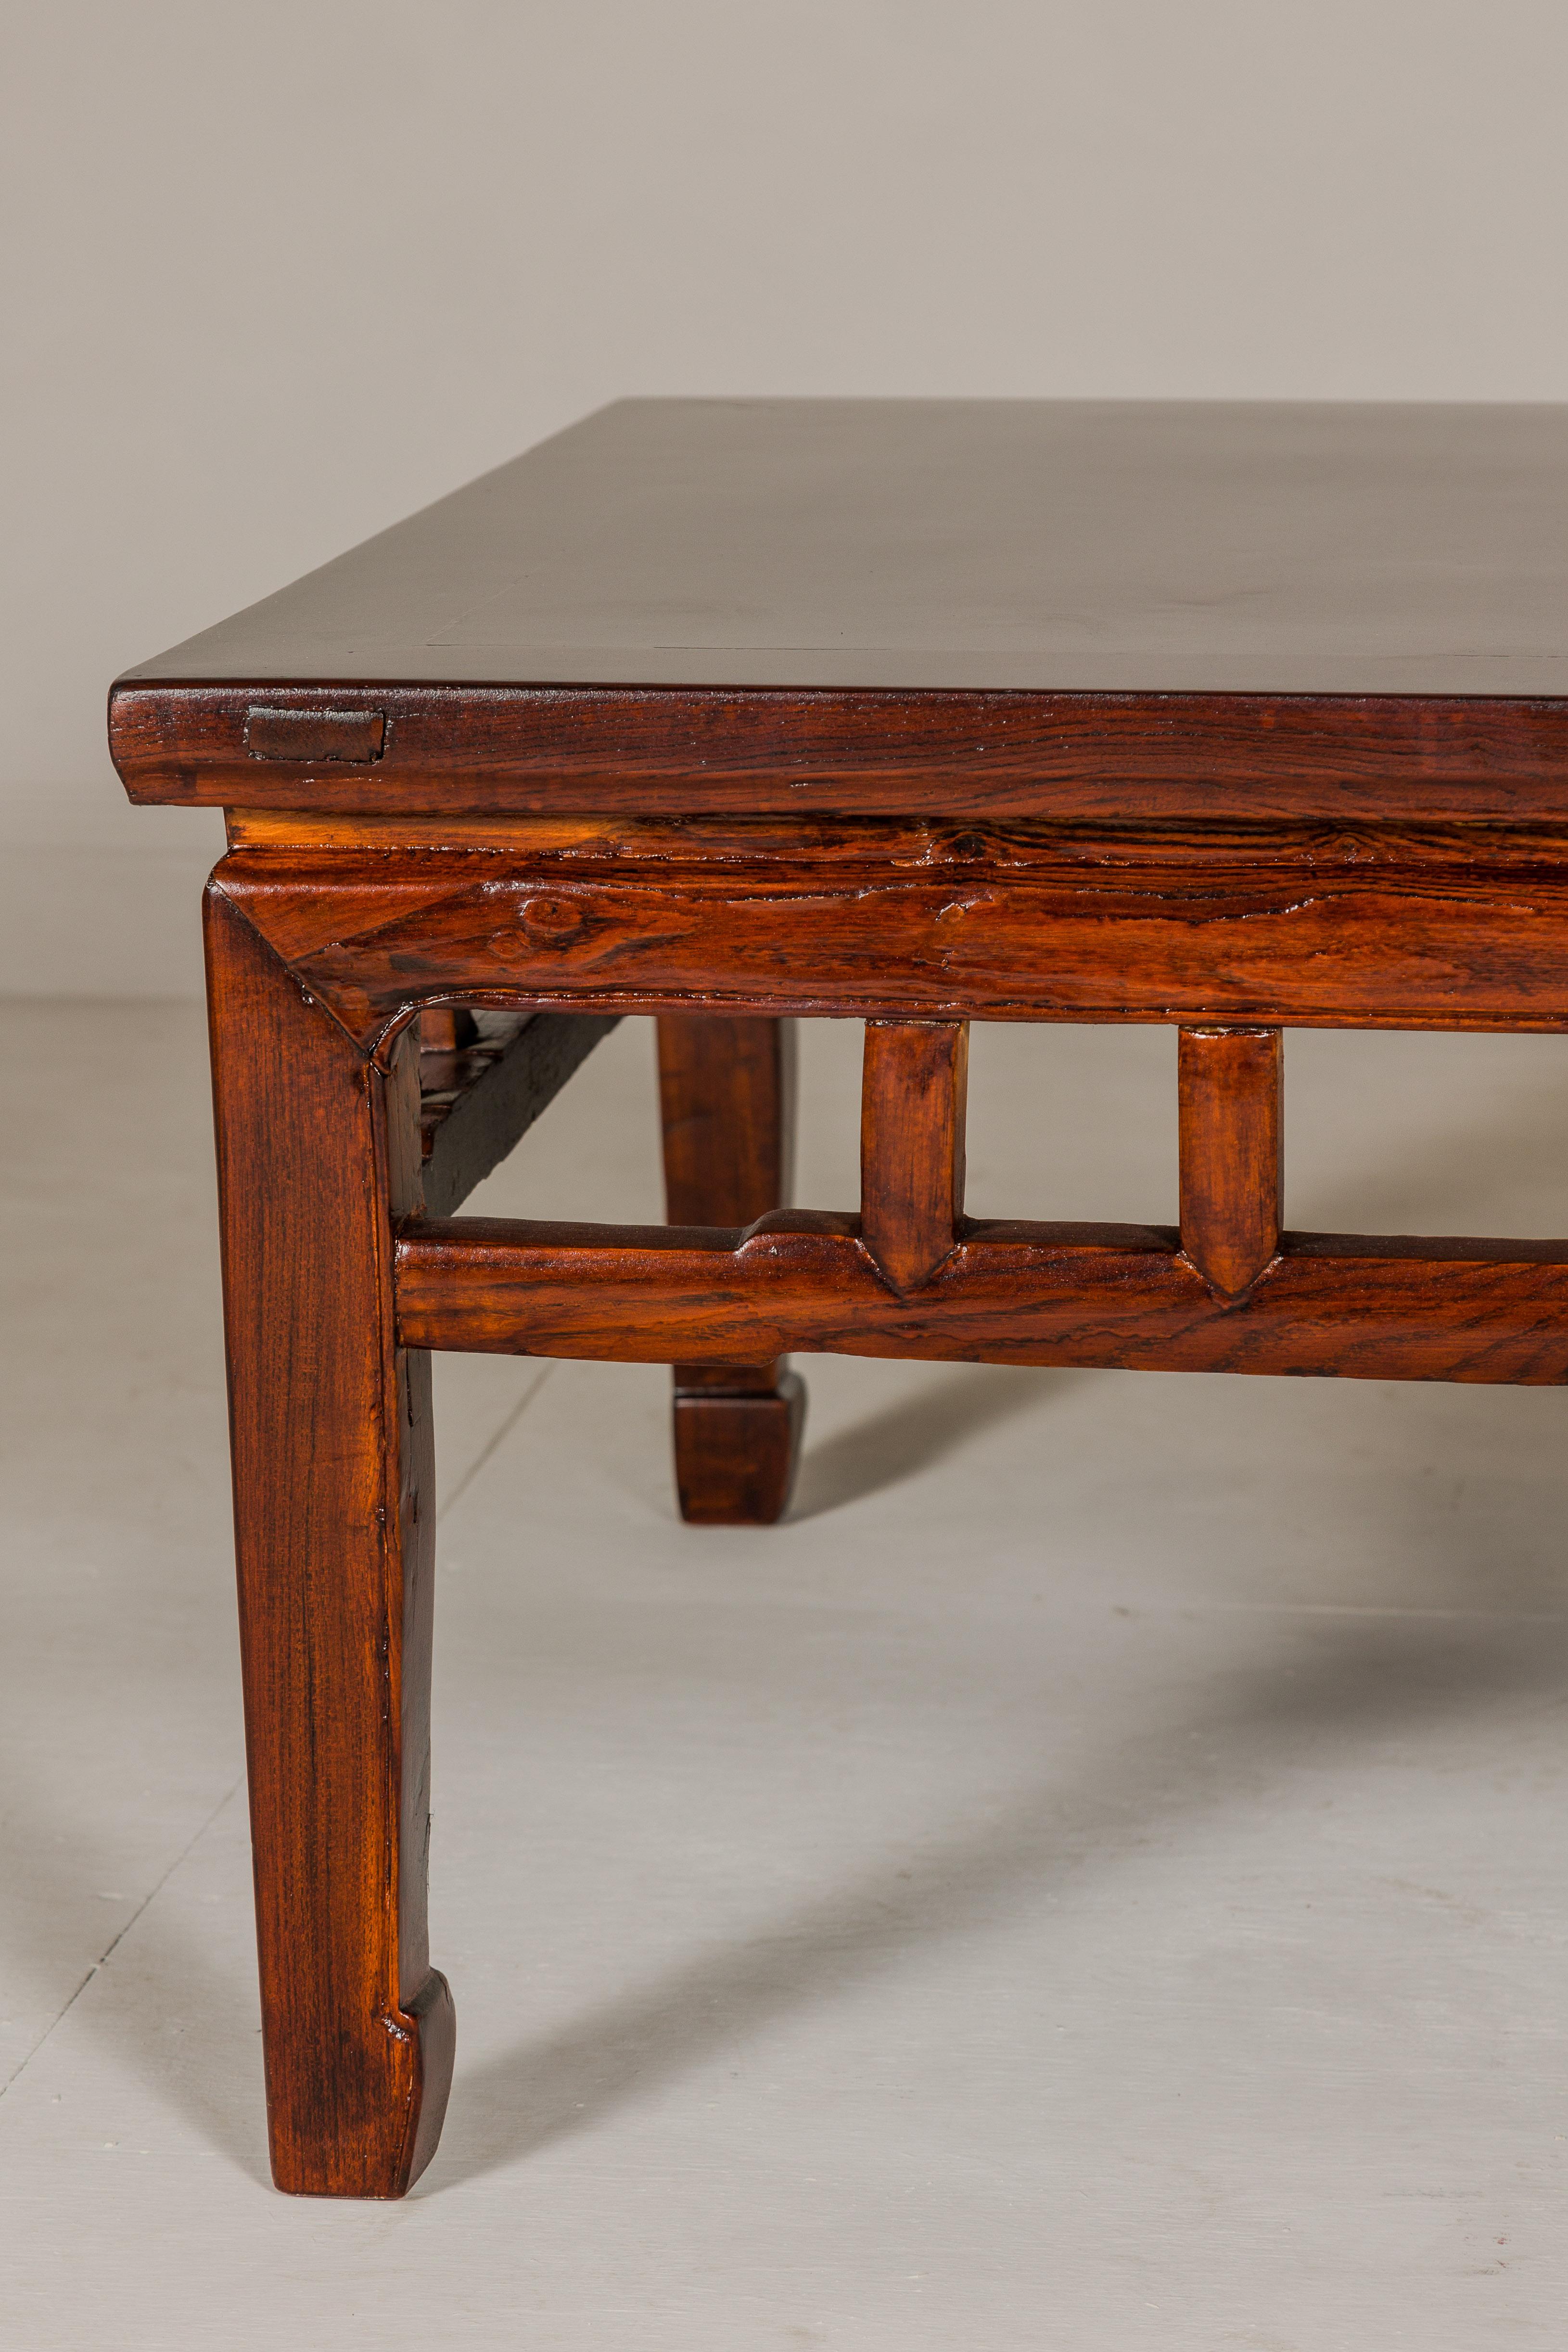 Wood Low Square Coffee Table with Brown Lacquer, Horse Hoof Legs, Humpback Stretcher  For Sale